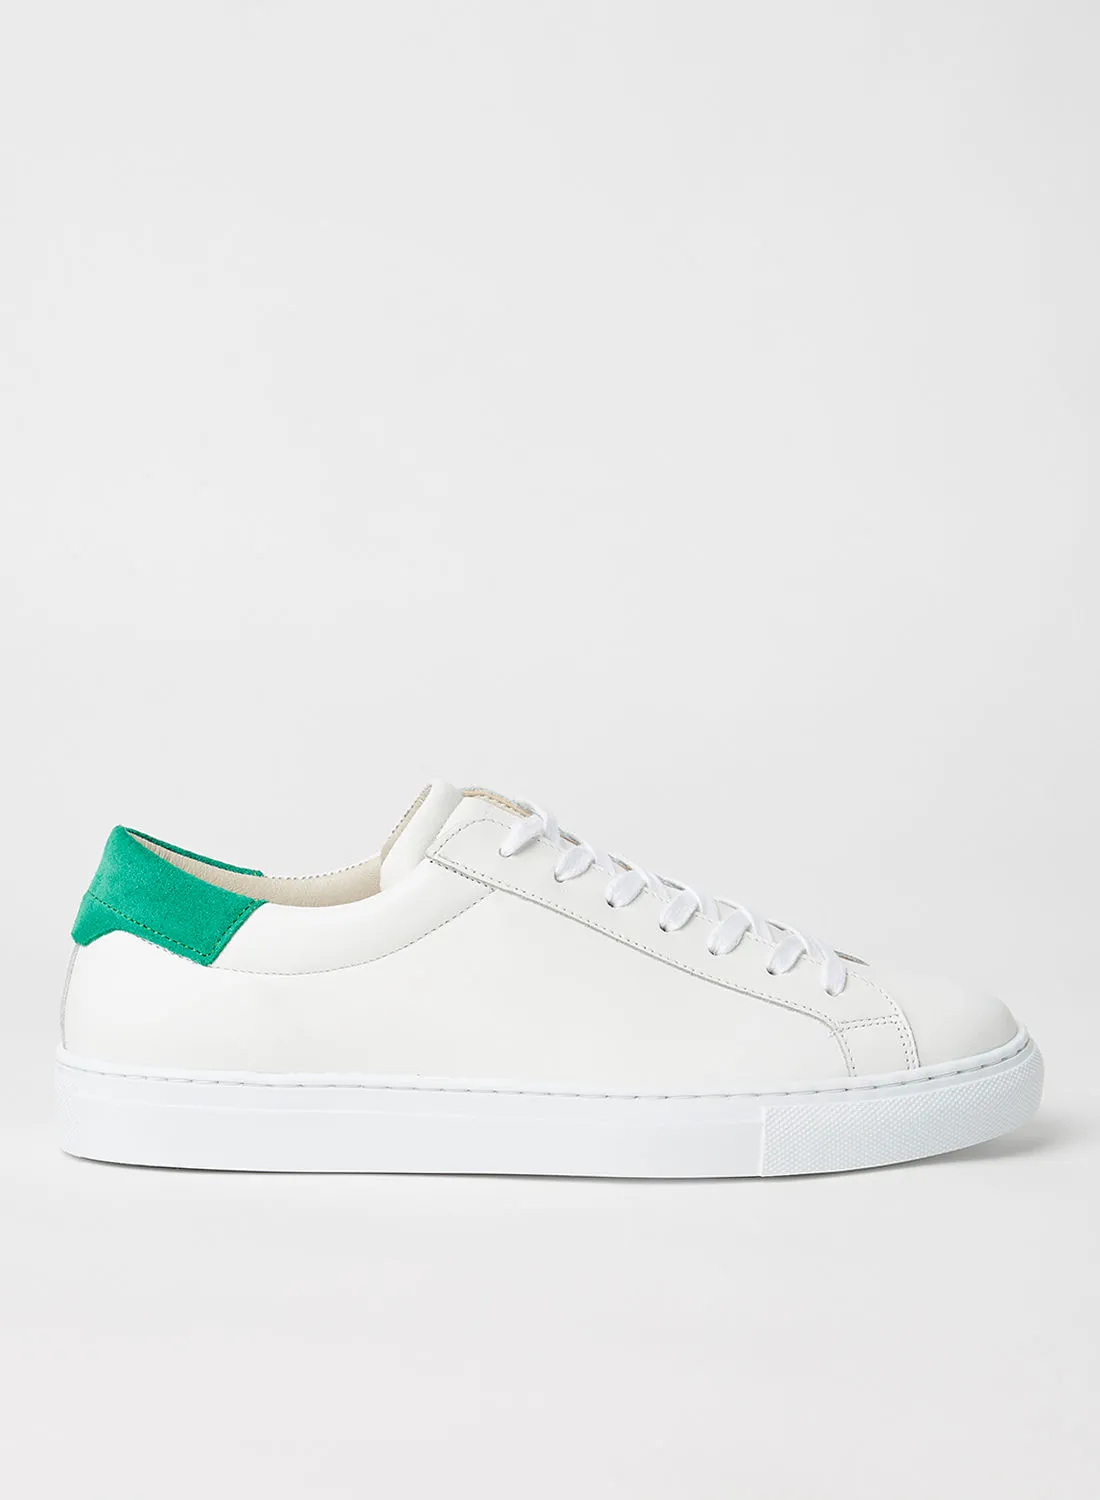 JACK & JONES Suede Panel Leather Sneakers White/Green